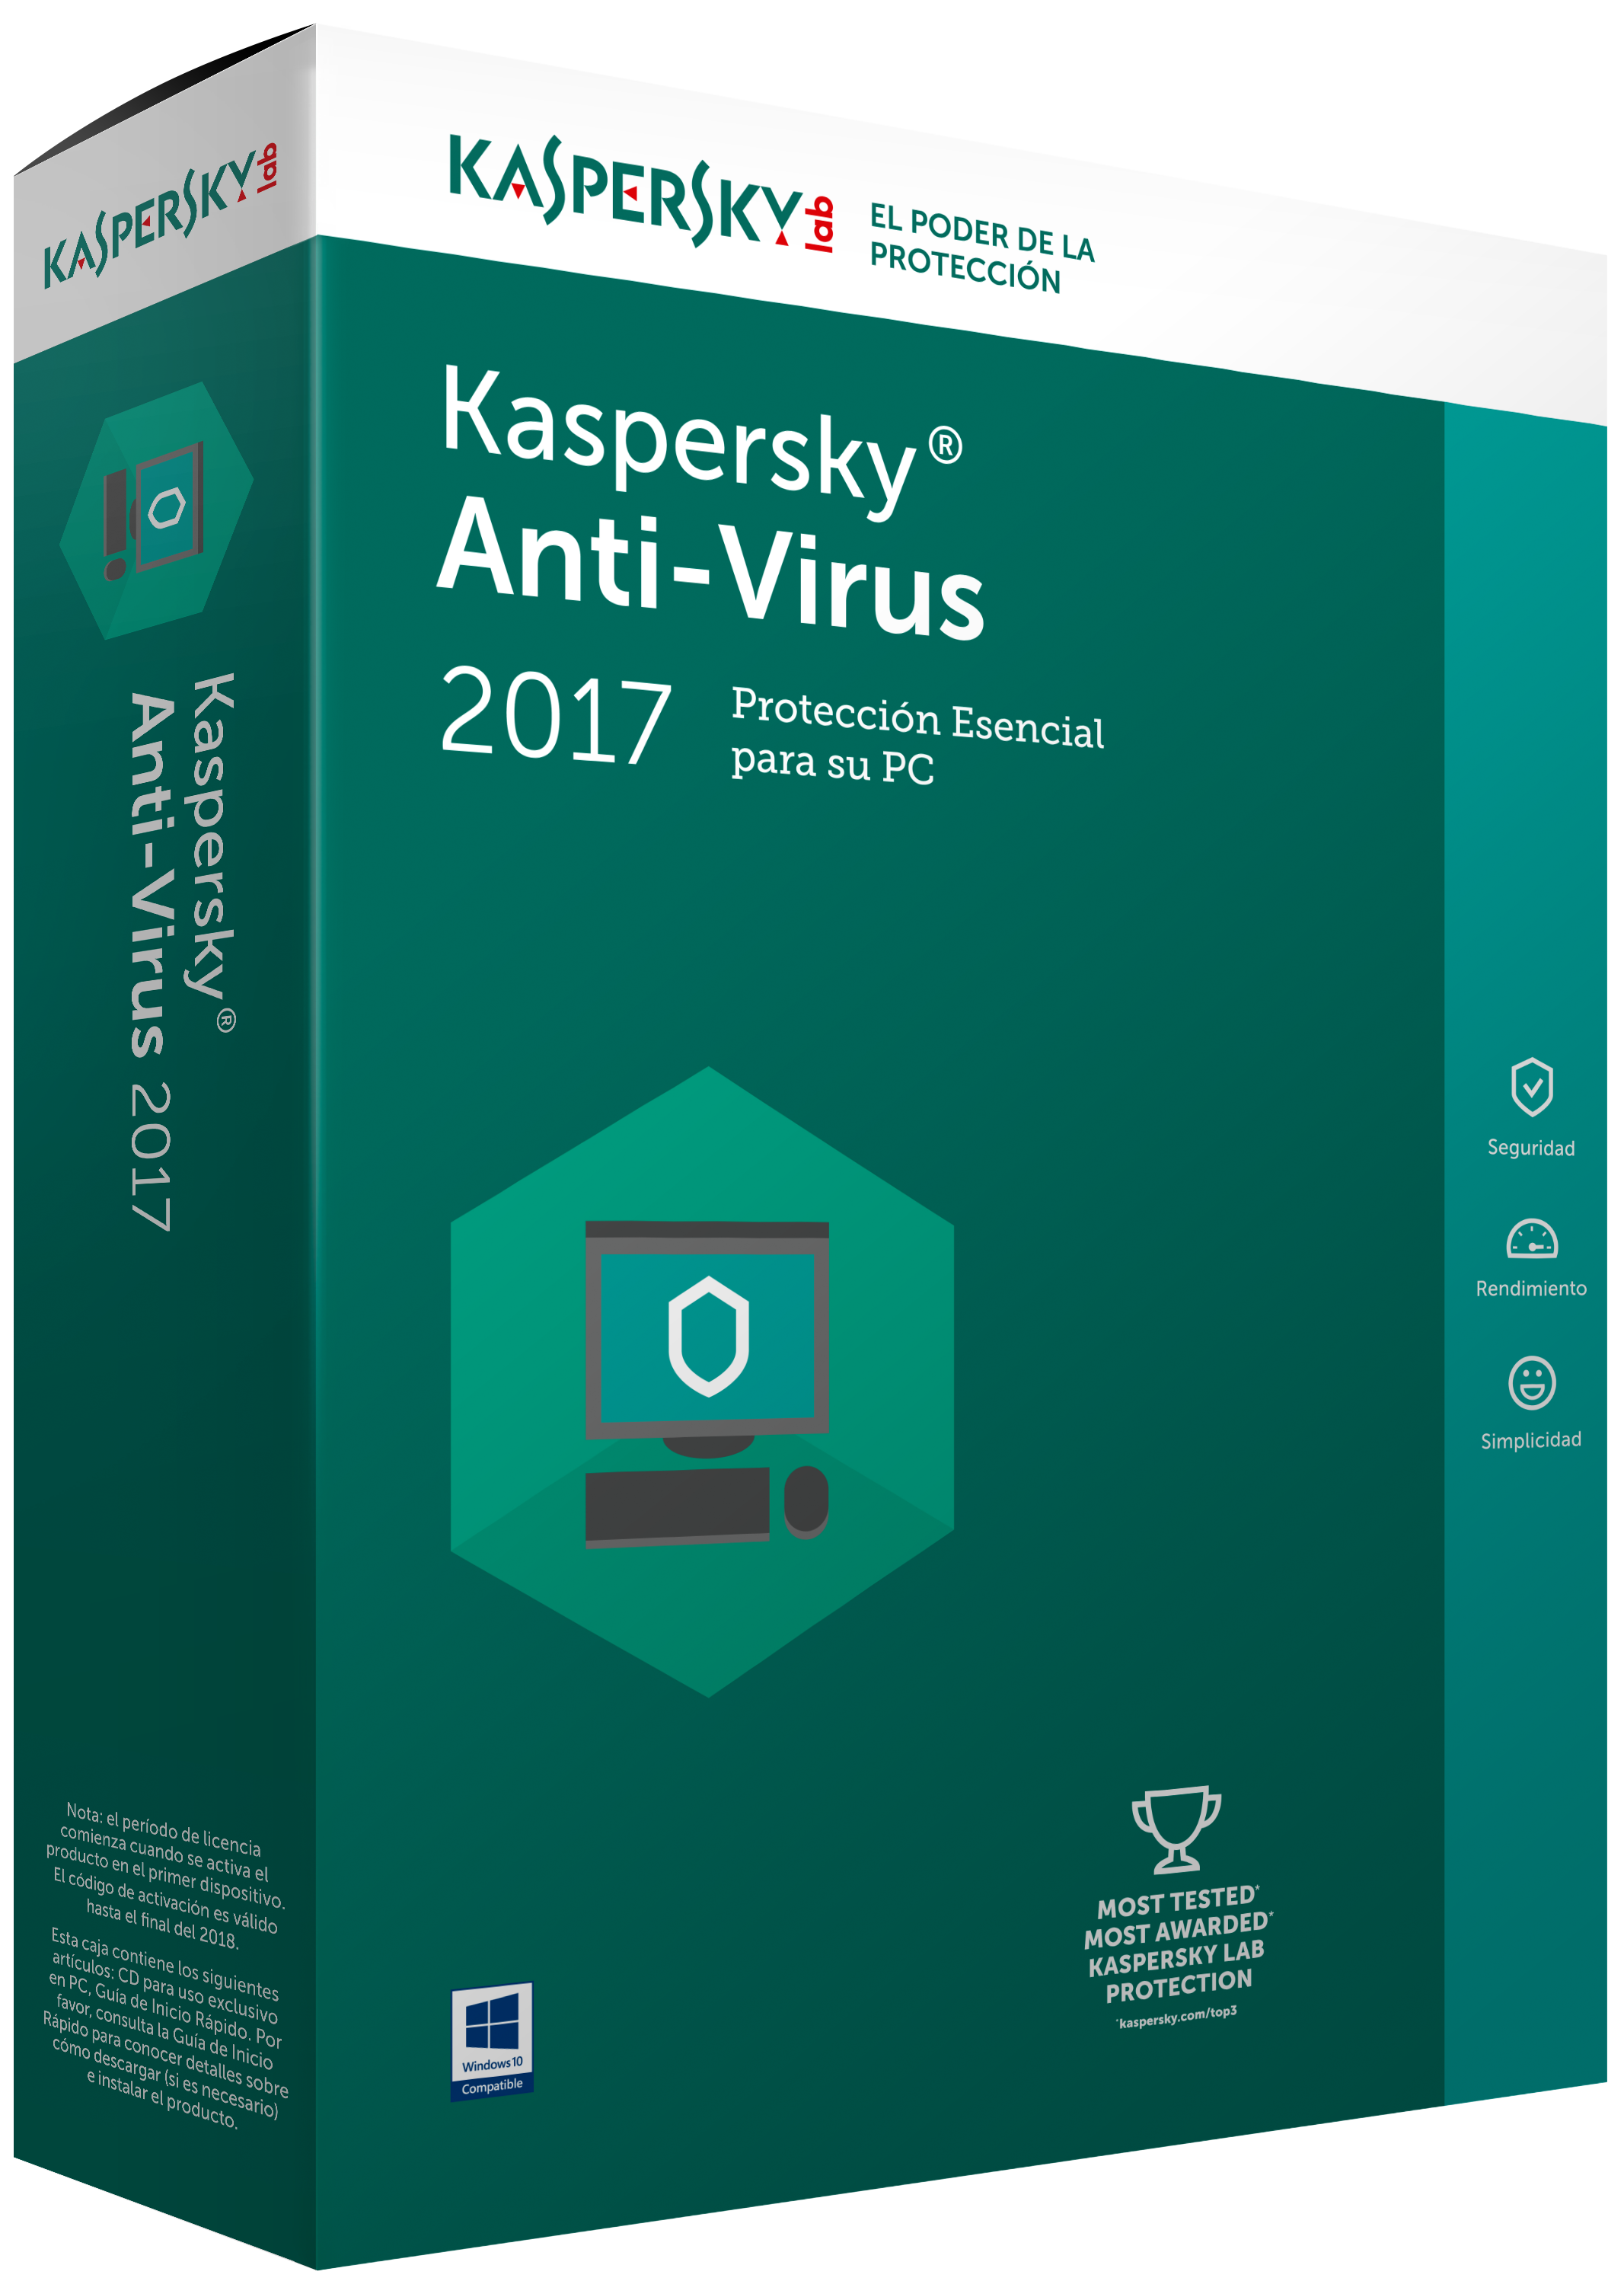 Free Virus Protection Internet Security Downloads